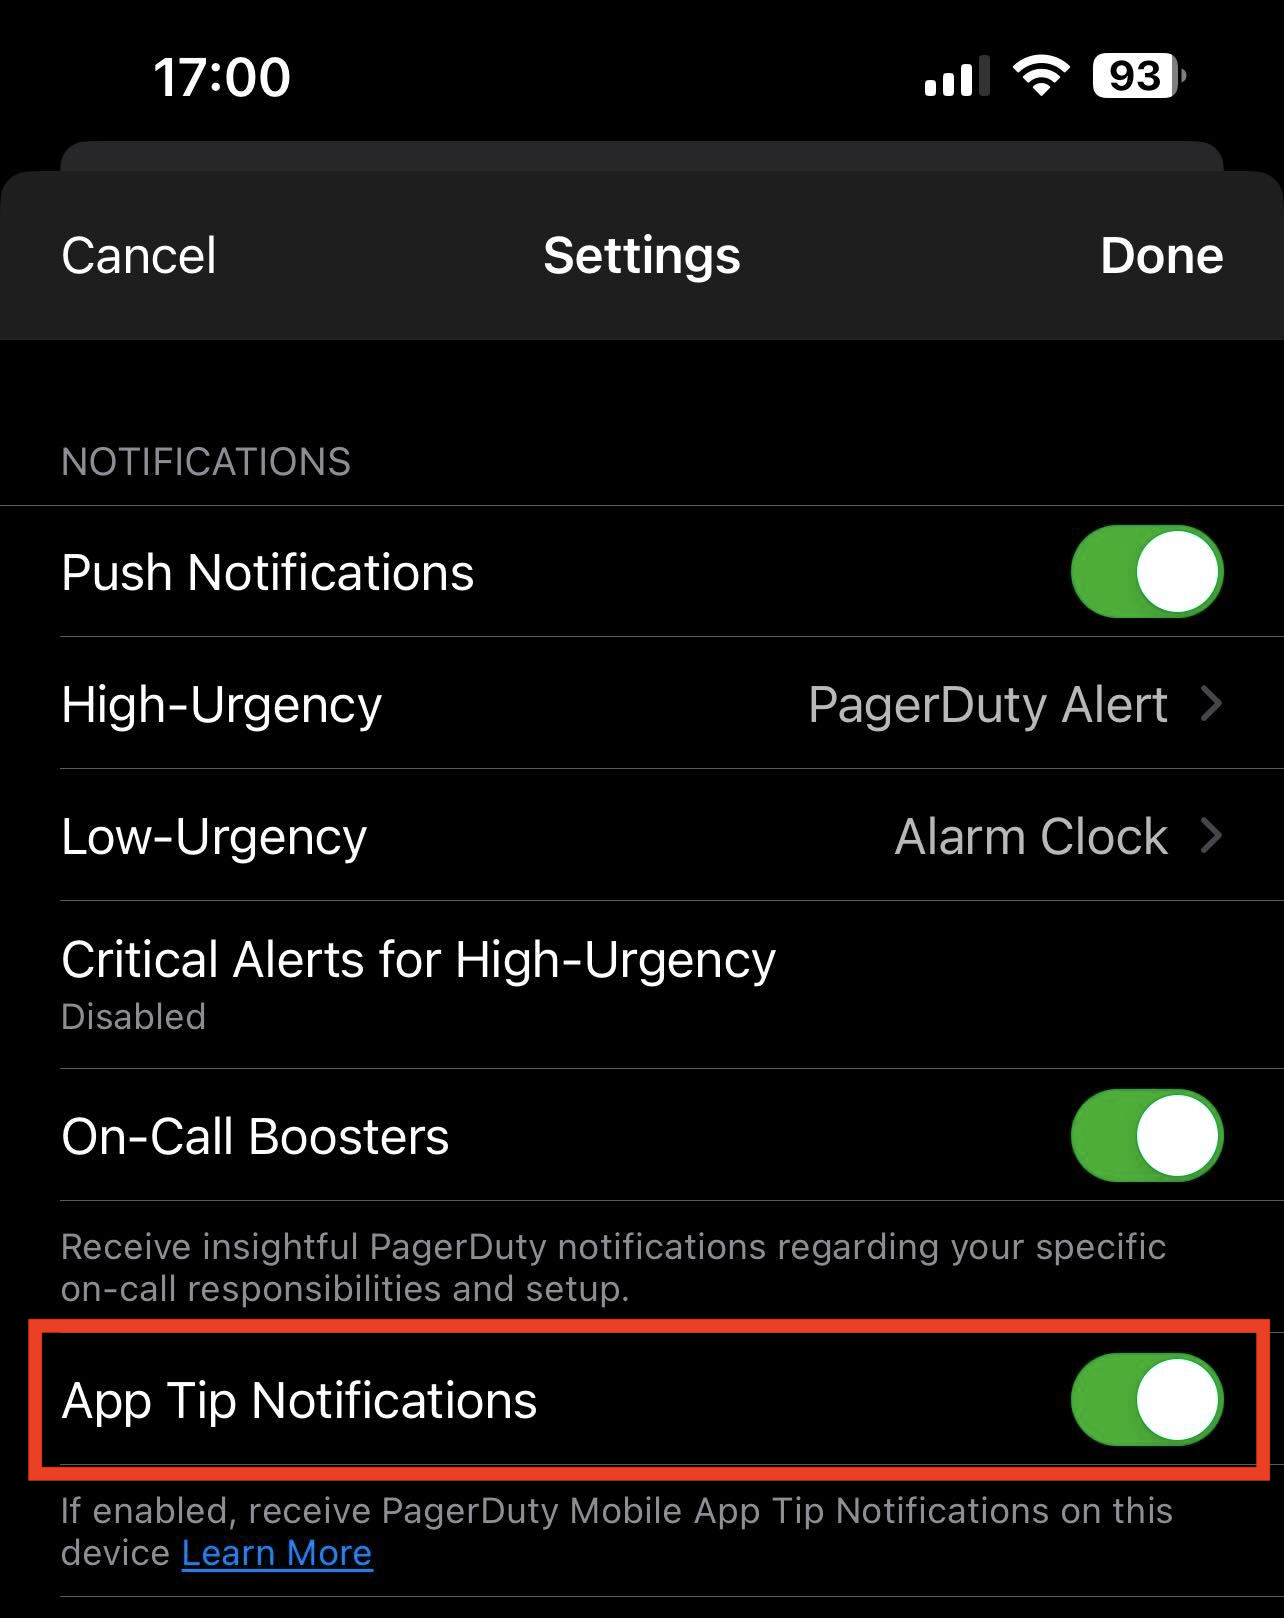 iOS: App Tip Notifications toggle